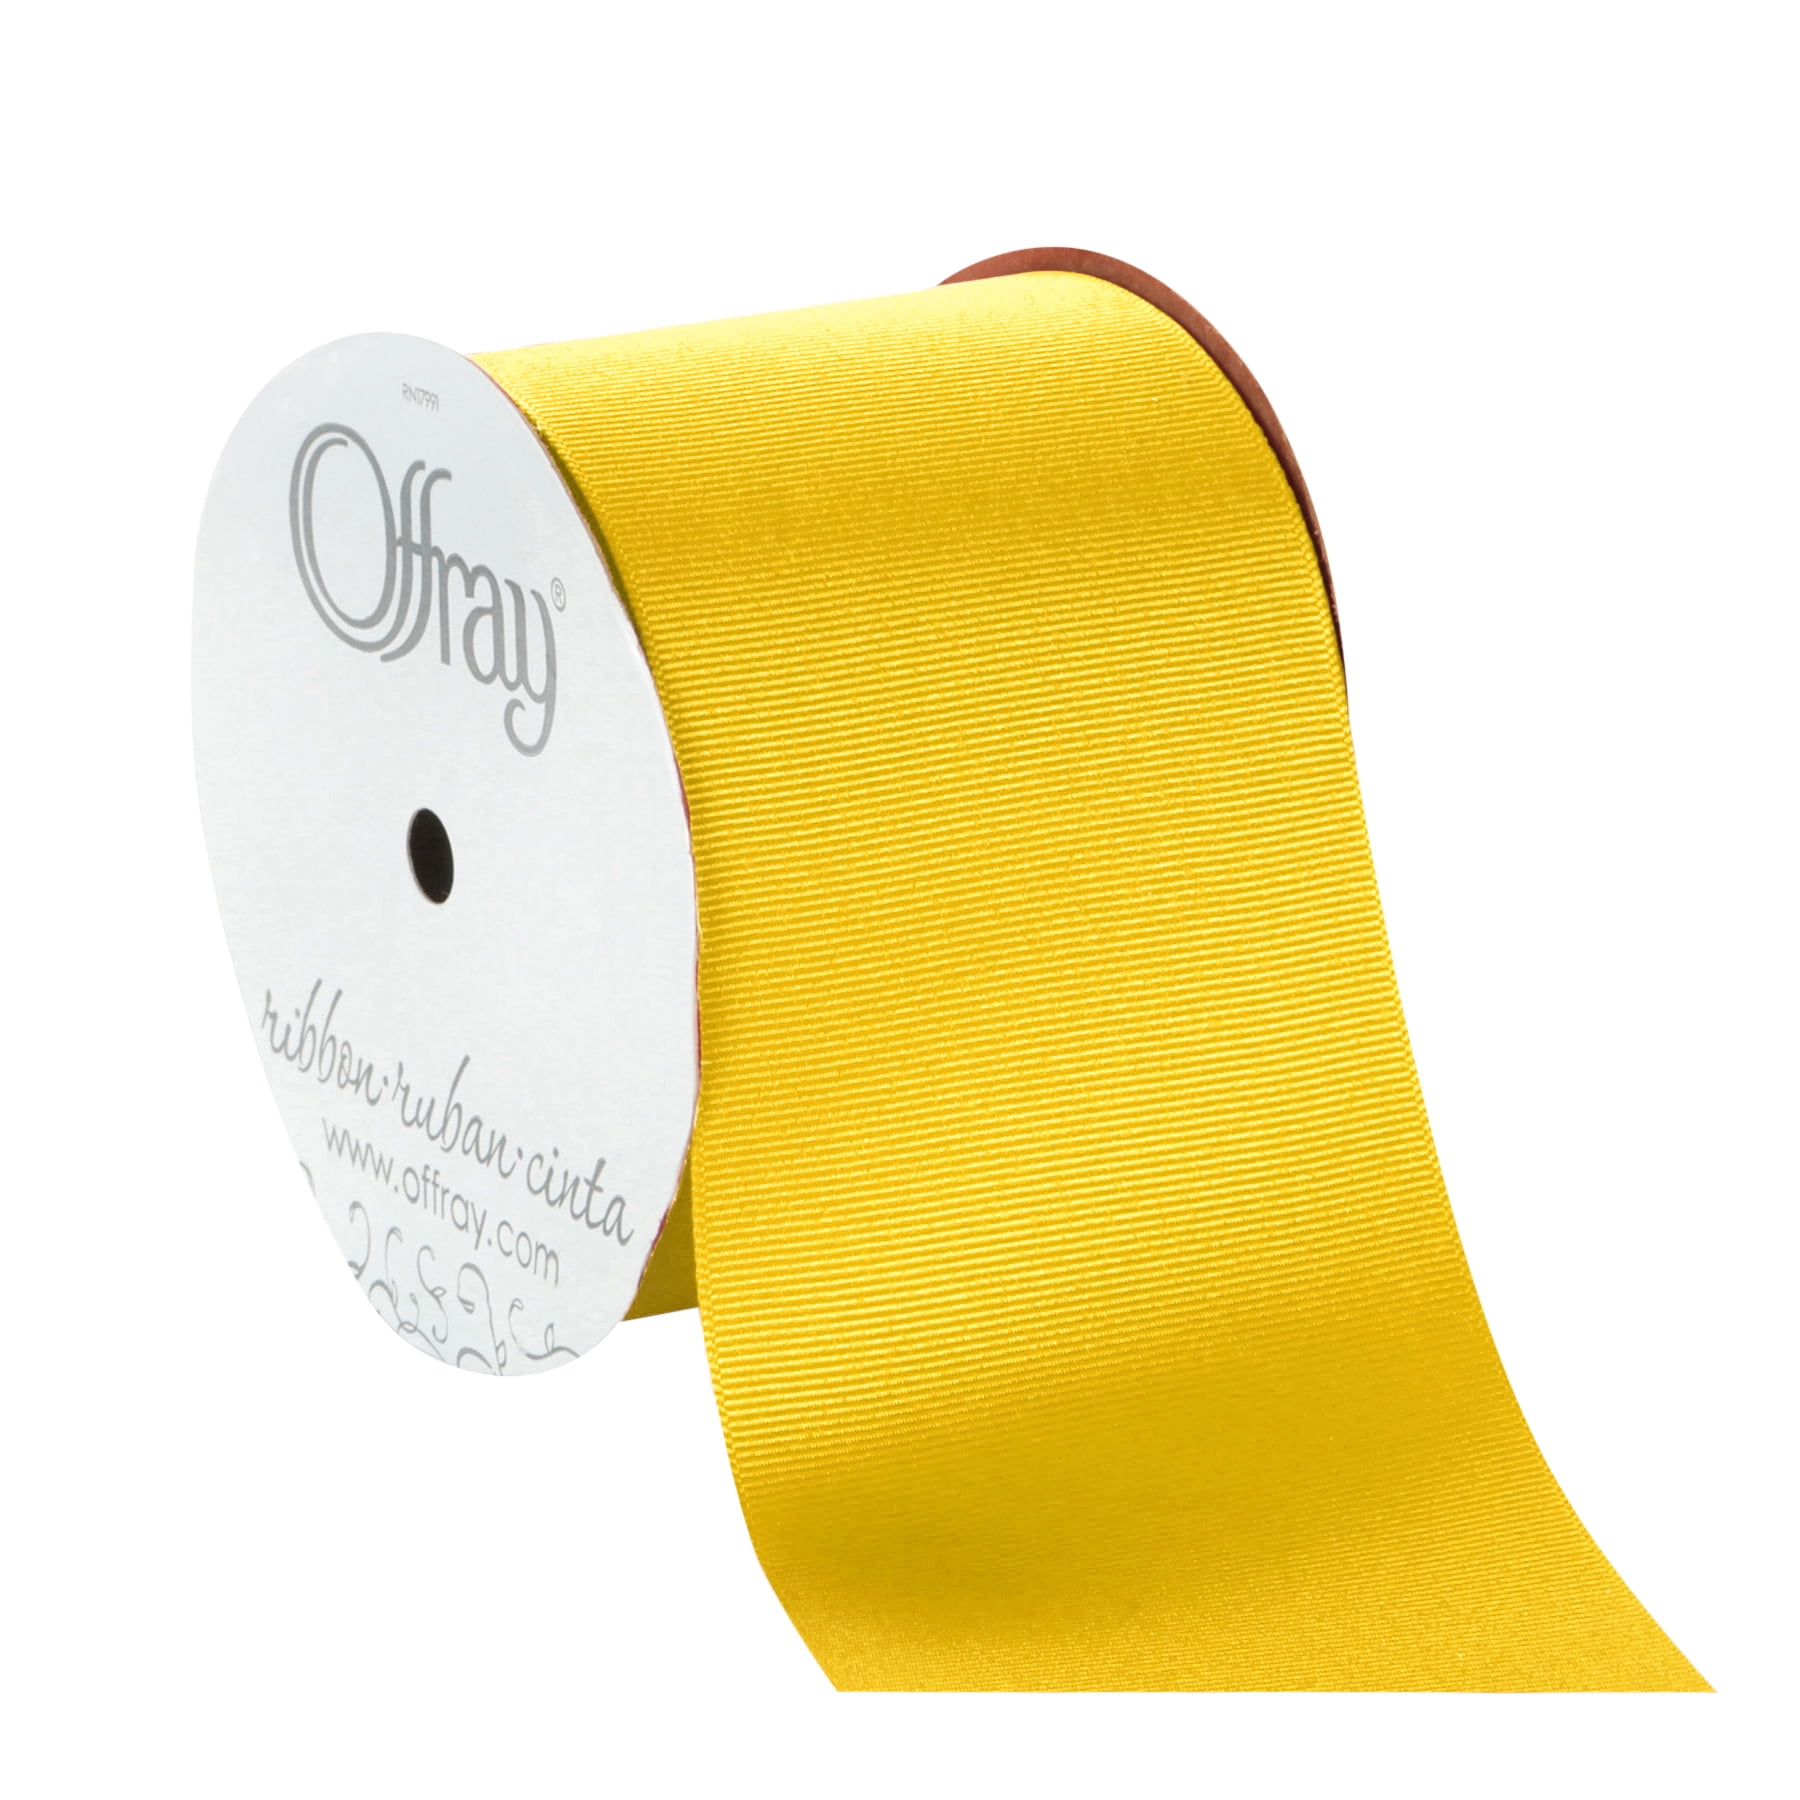 Offray Ribbon, Maize Yellow 3 inch Grosgrain Polyester Ribbon, 9 feet 